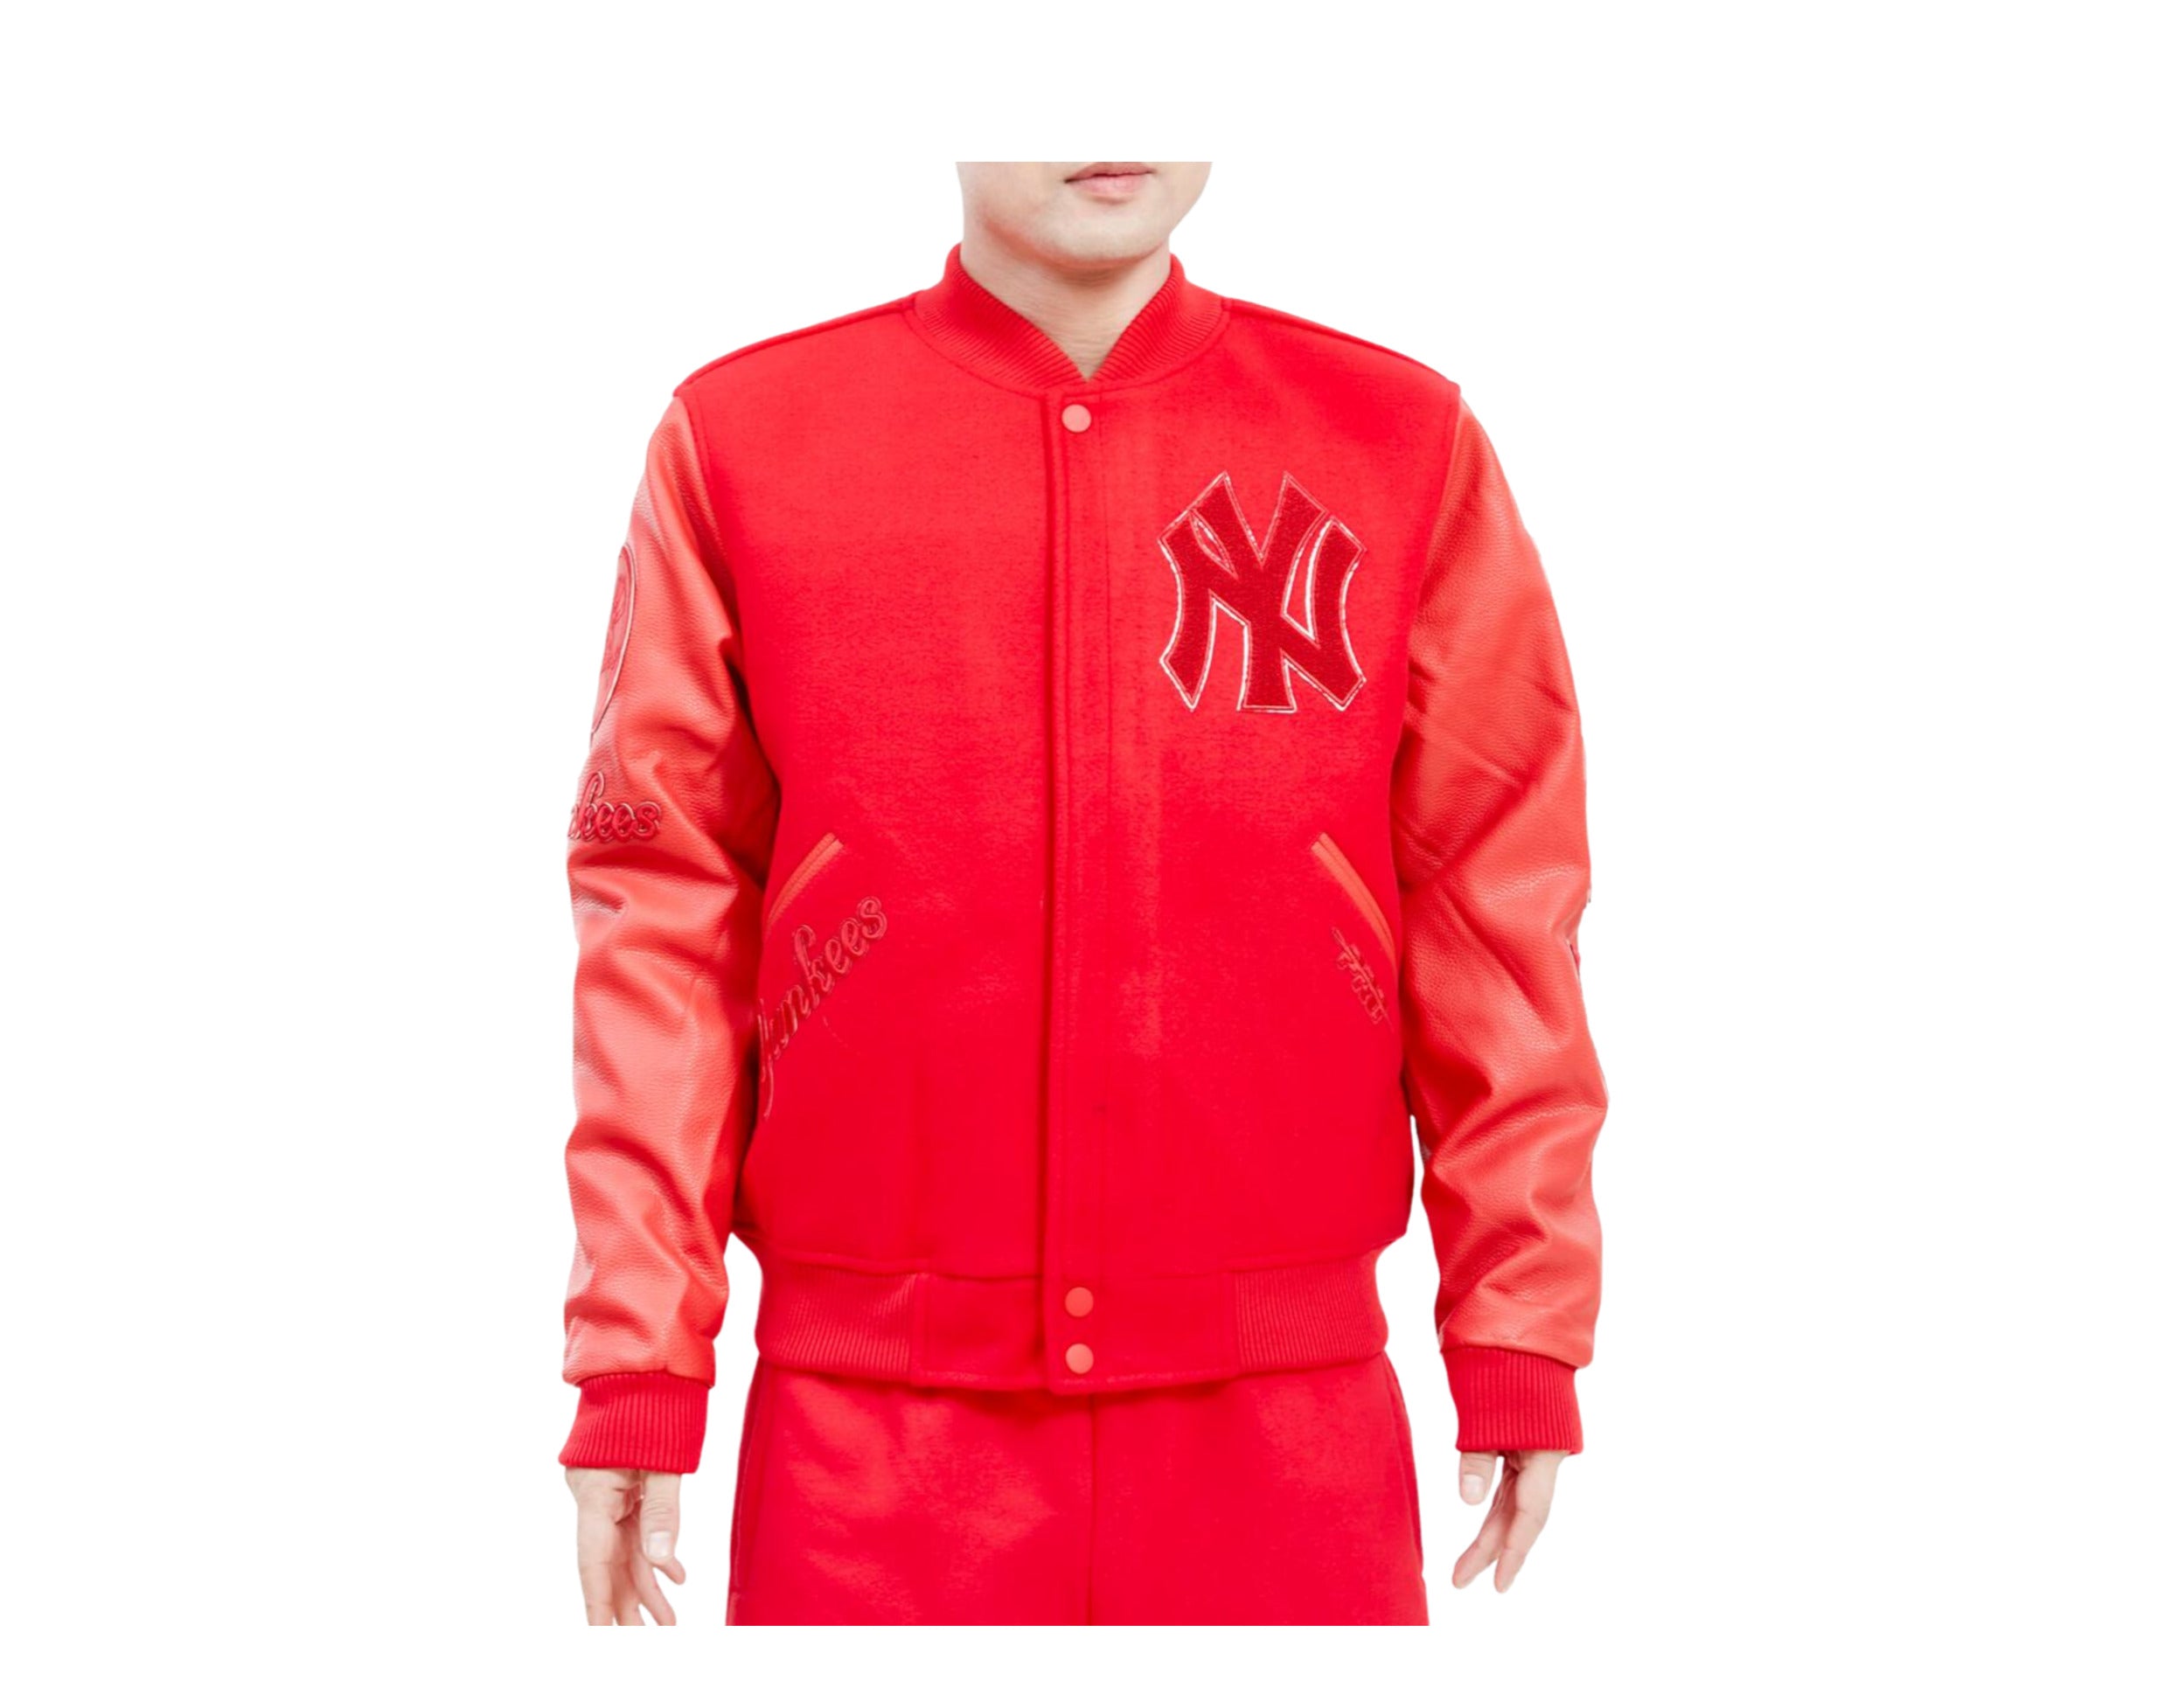 NEW YORK YANKEES RED ZIP FRONT MLB JACKET WITH PULL-UP HOOD